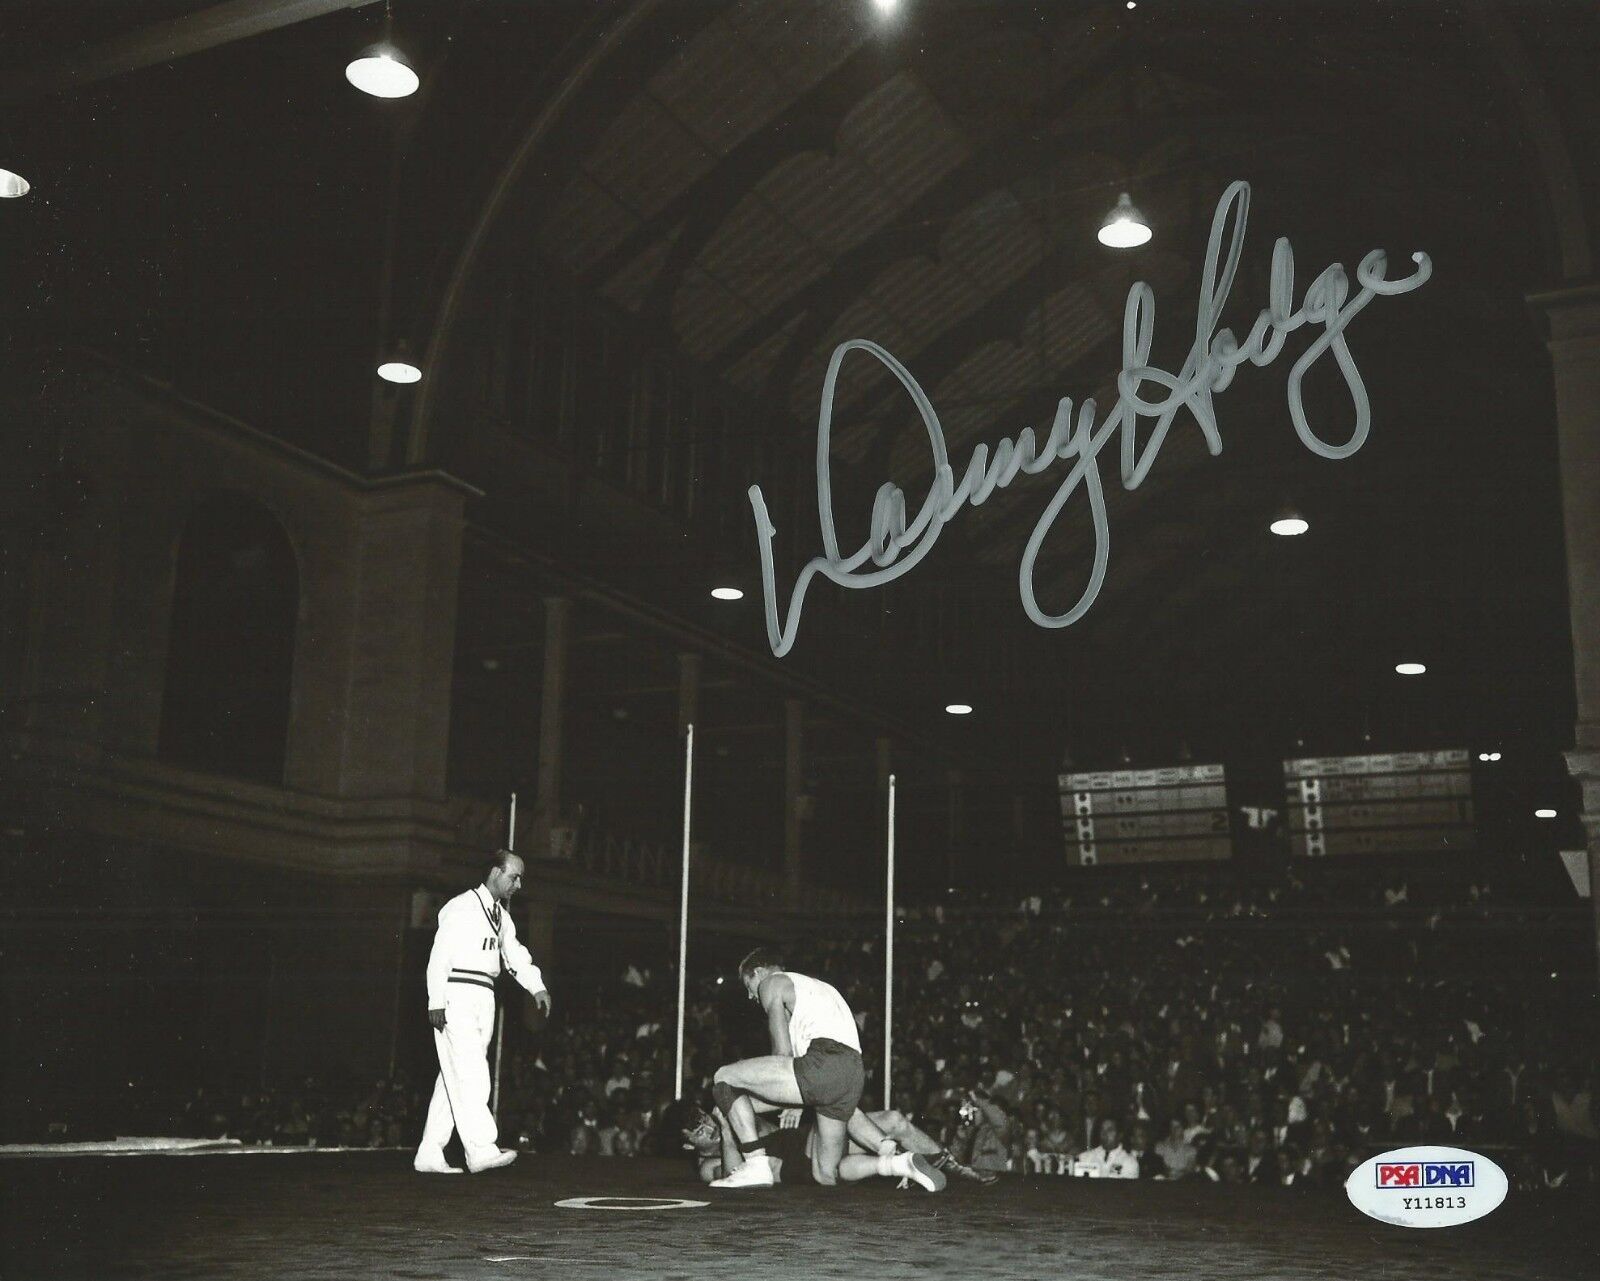 Danny Hodge Signed 8x10 Photo Poster painting PSA/DNA COA 1956 USA Olympic US Wrestling Picture